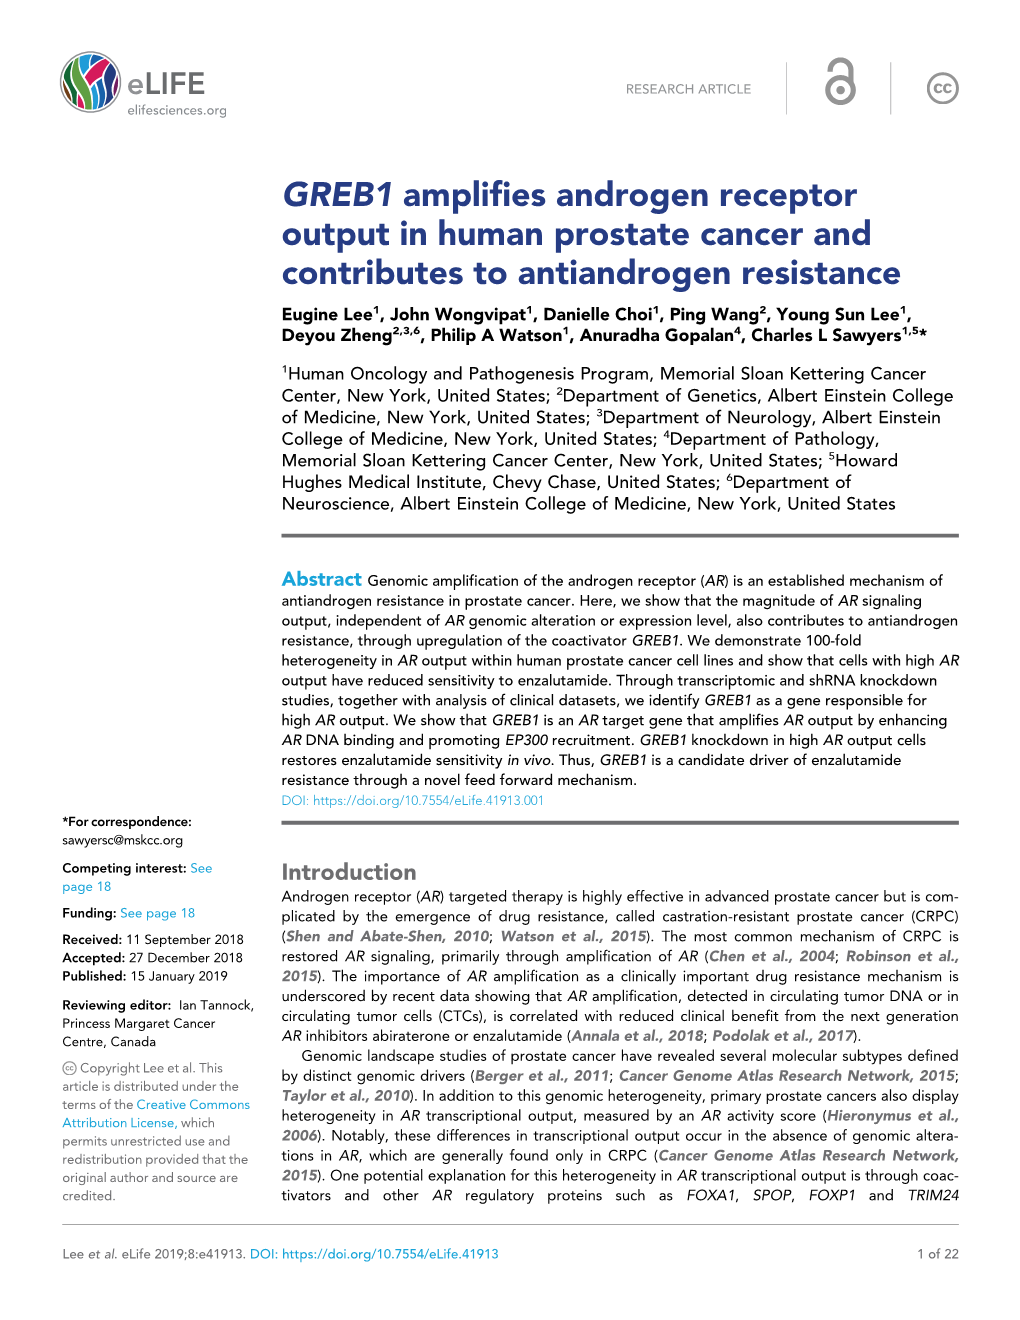 GREB1 Amplifies Androgen Receptor Output in Human Prostate Cancer and Contributes to Antiandrogen Resistance